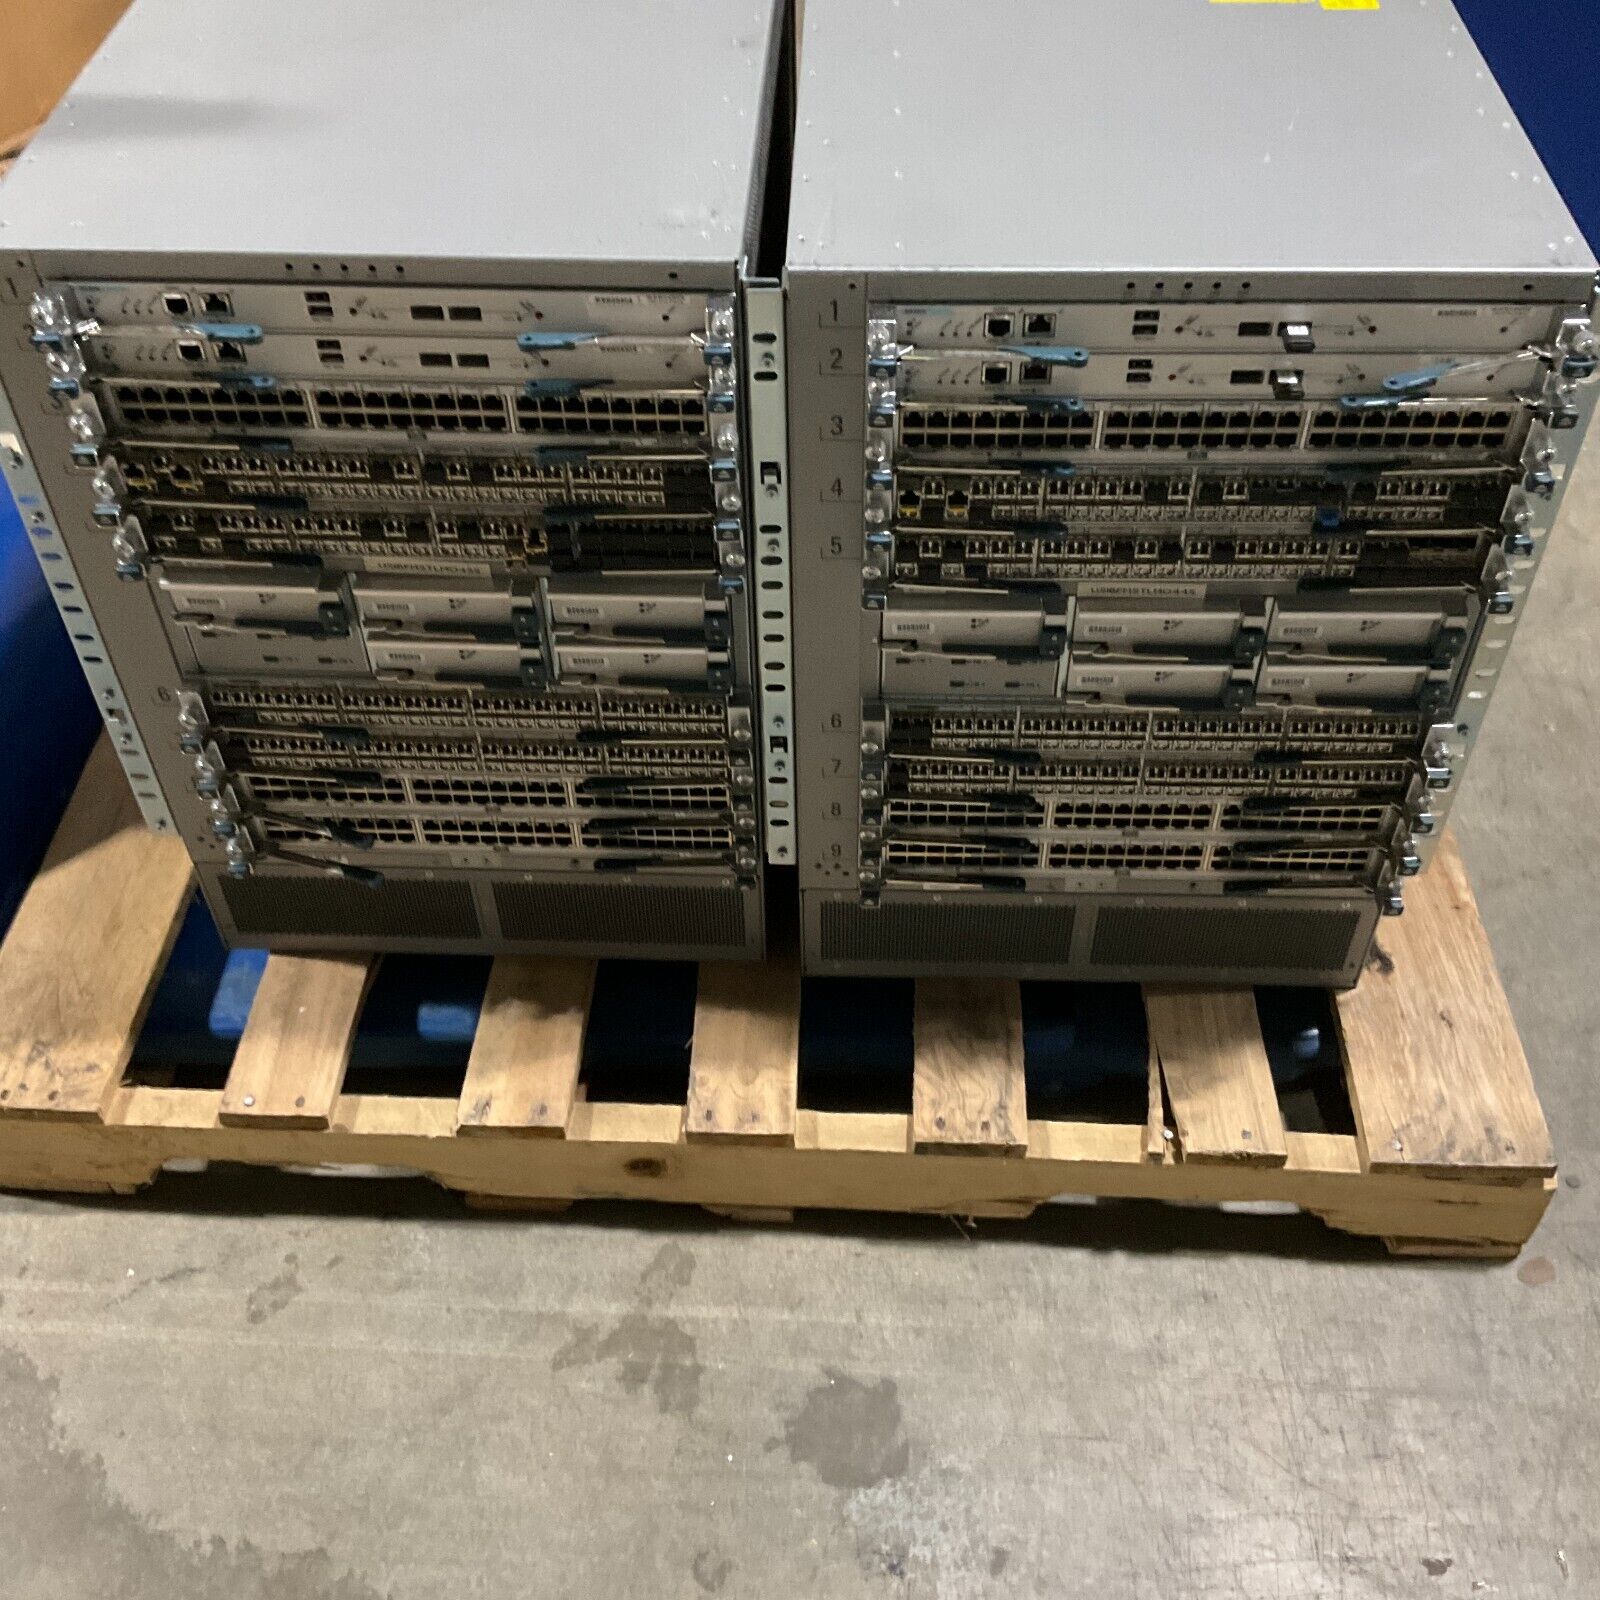 Lot of 2 Cisco Nexus 7000 Systems w/ Modules Tested and Working